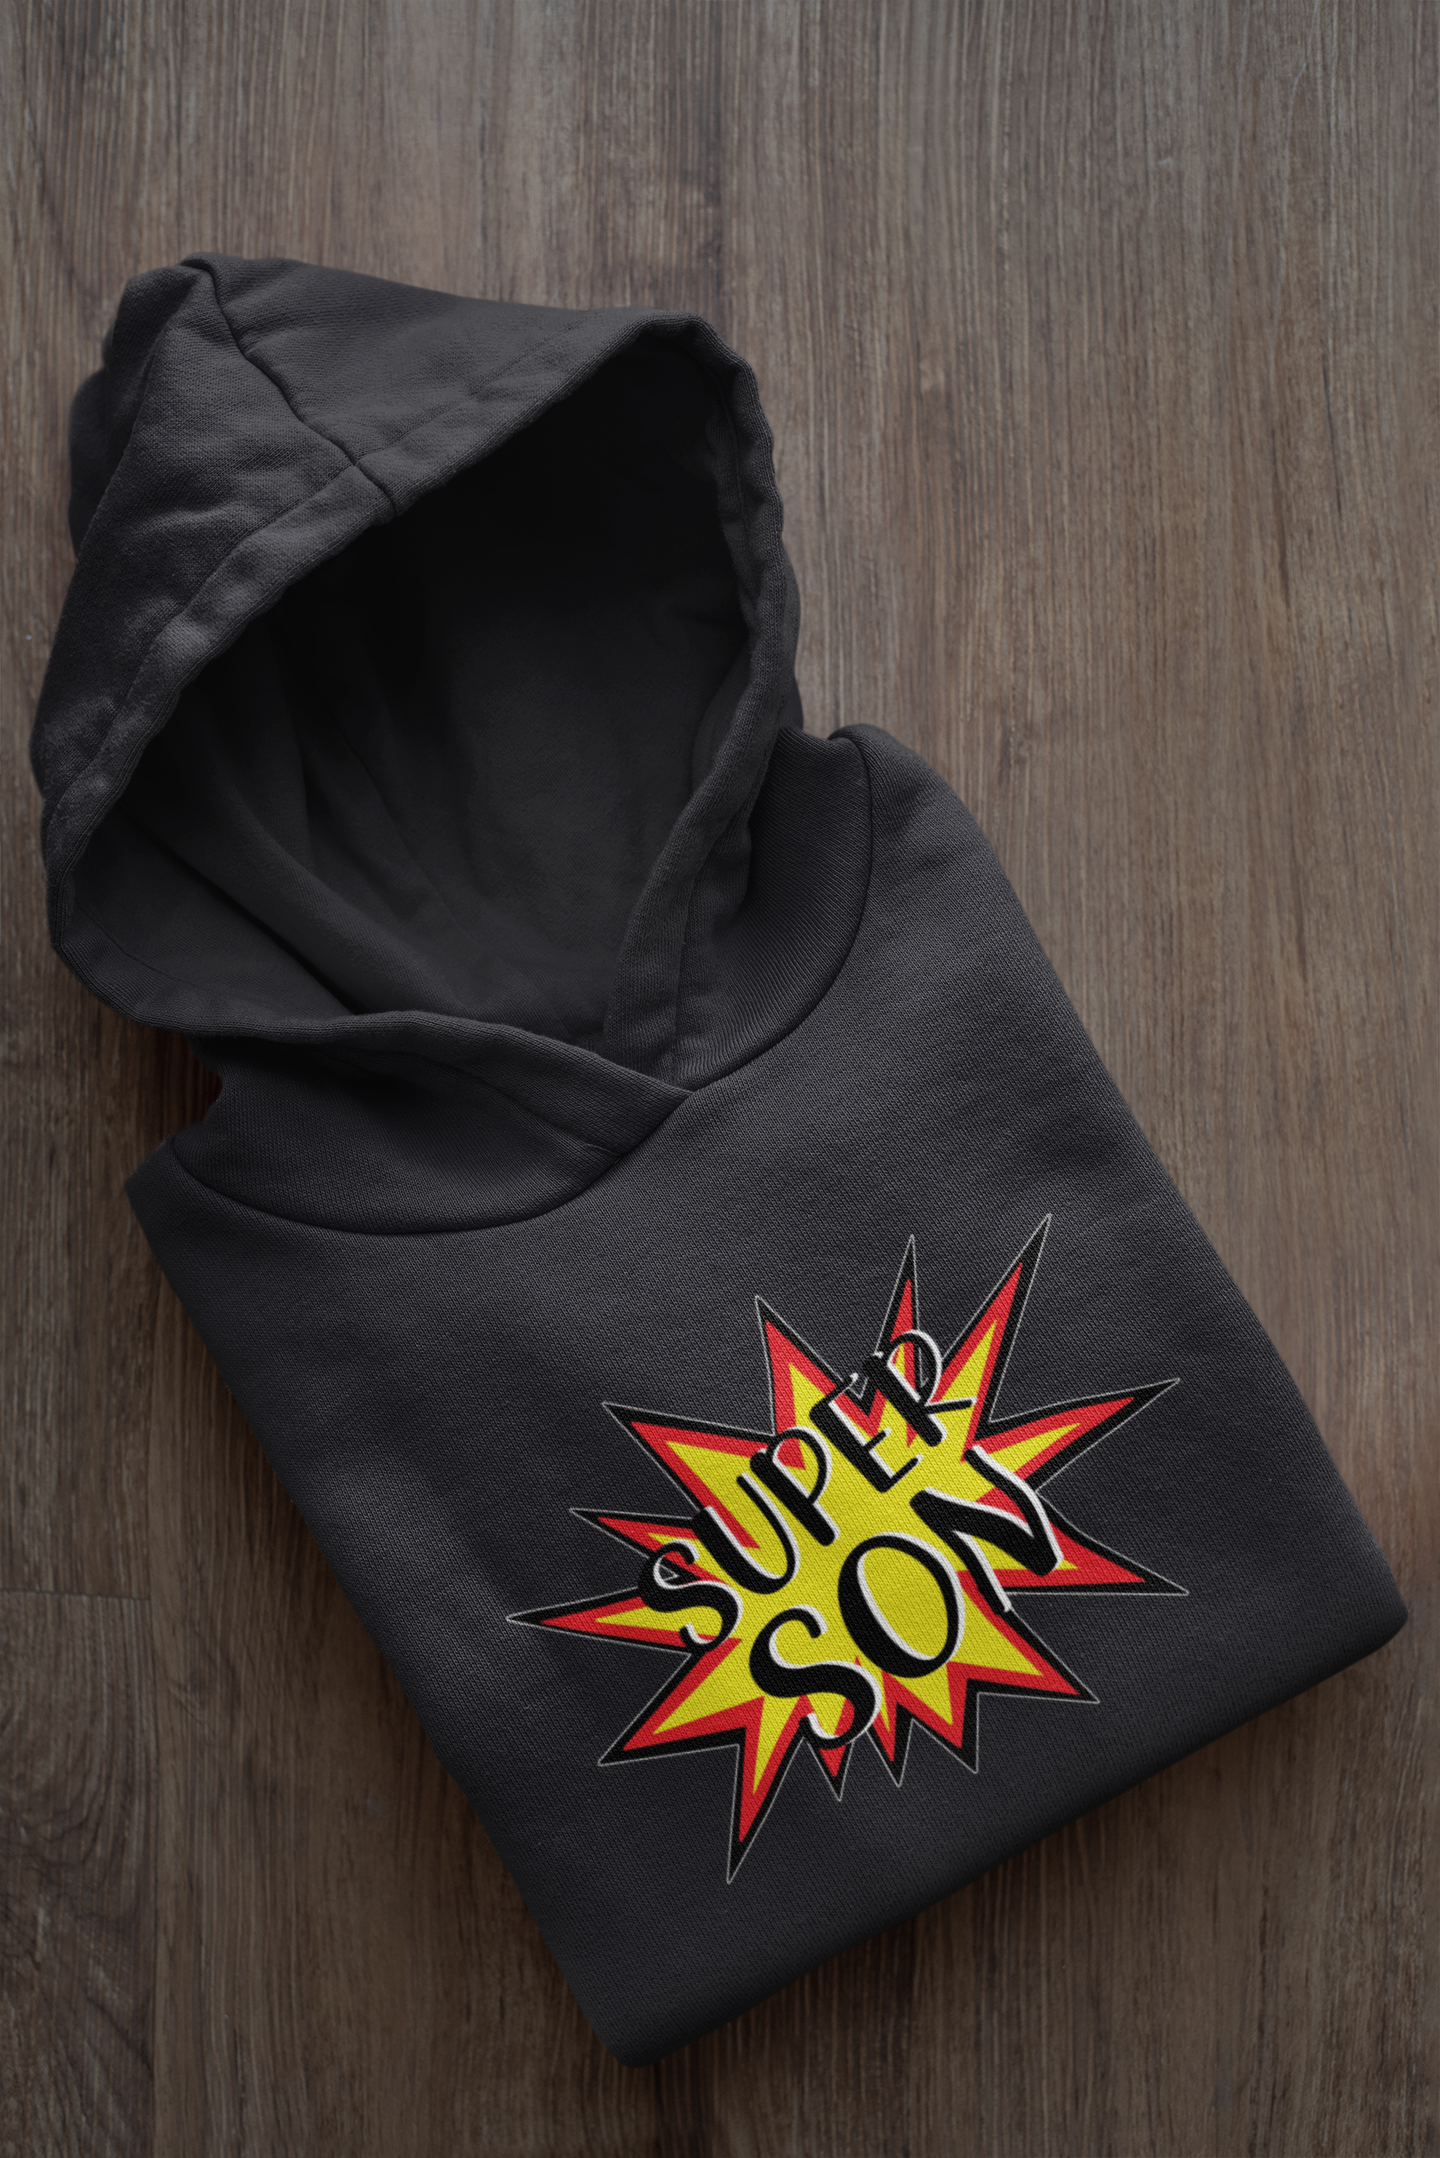 Super Dad Father and Son Black Matching Hoodies- FunkyTeesClub